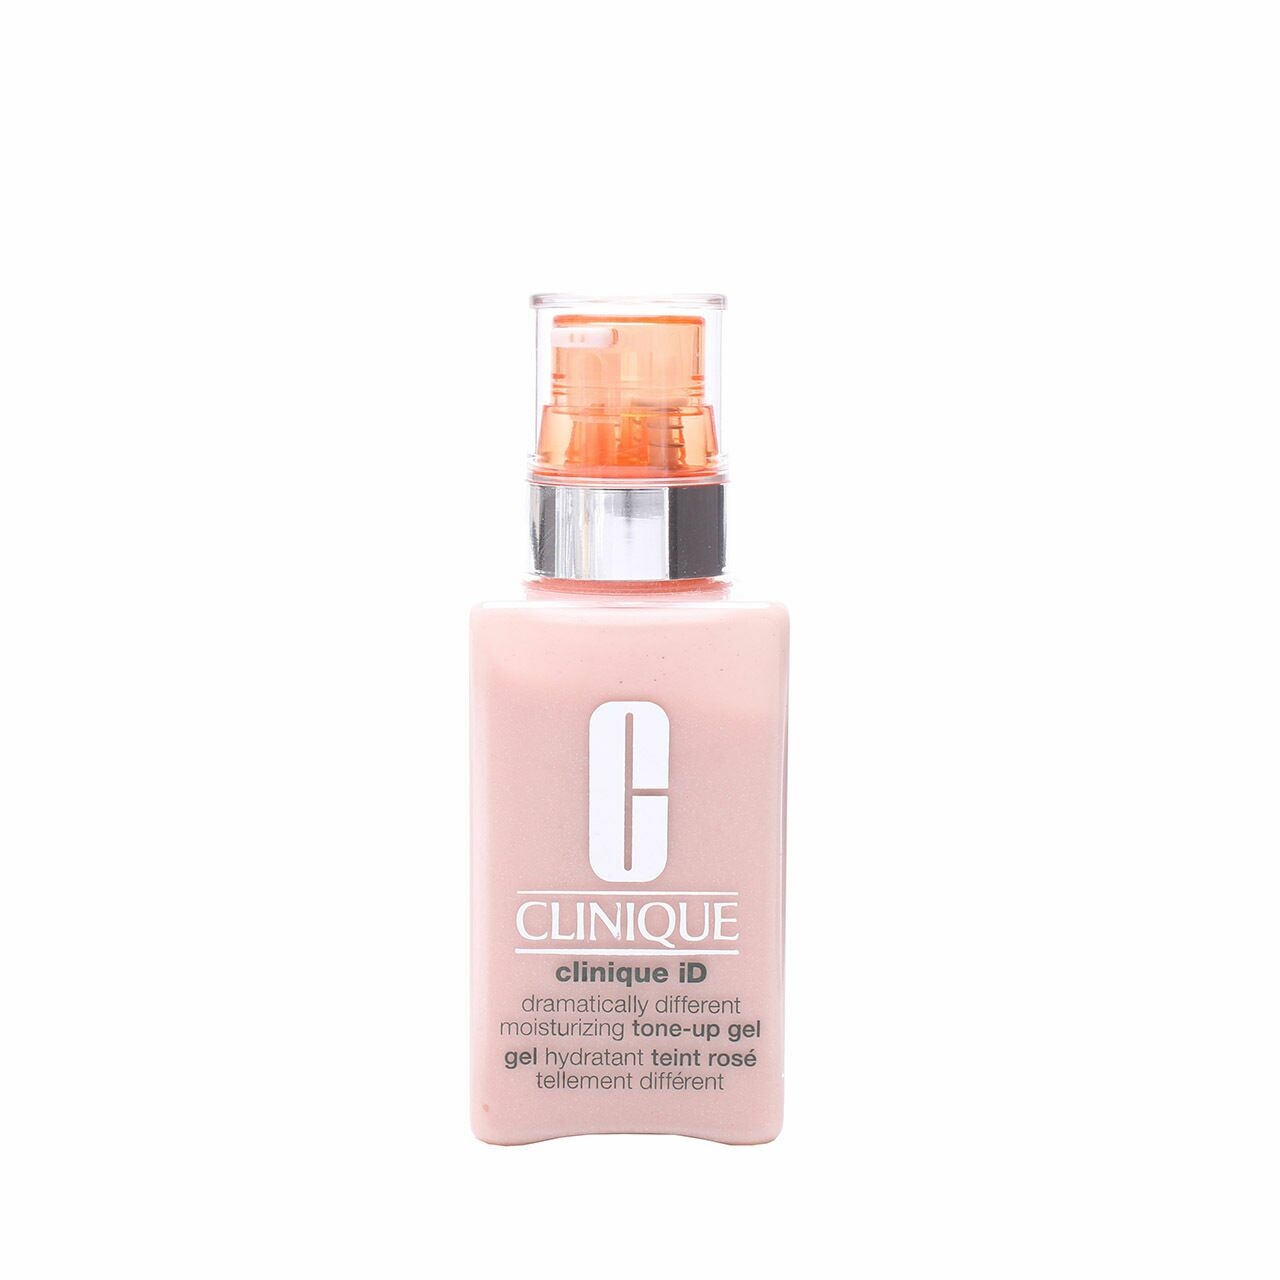 Clinique Dramatically Different Moisturizing Tone-Up Gel Skin Care